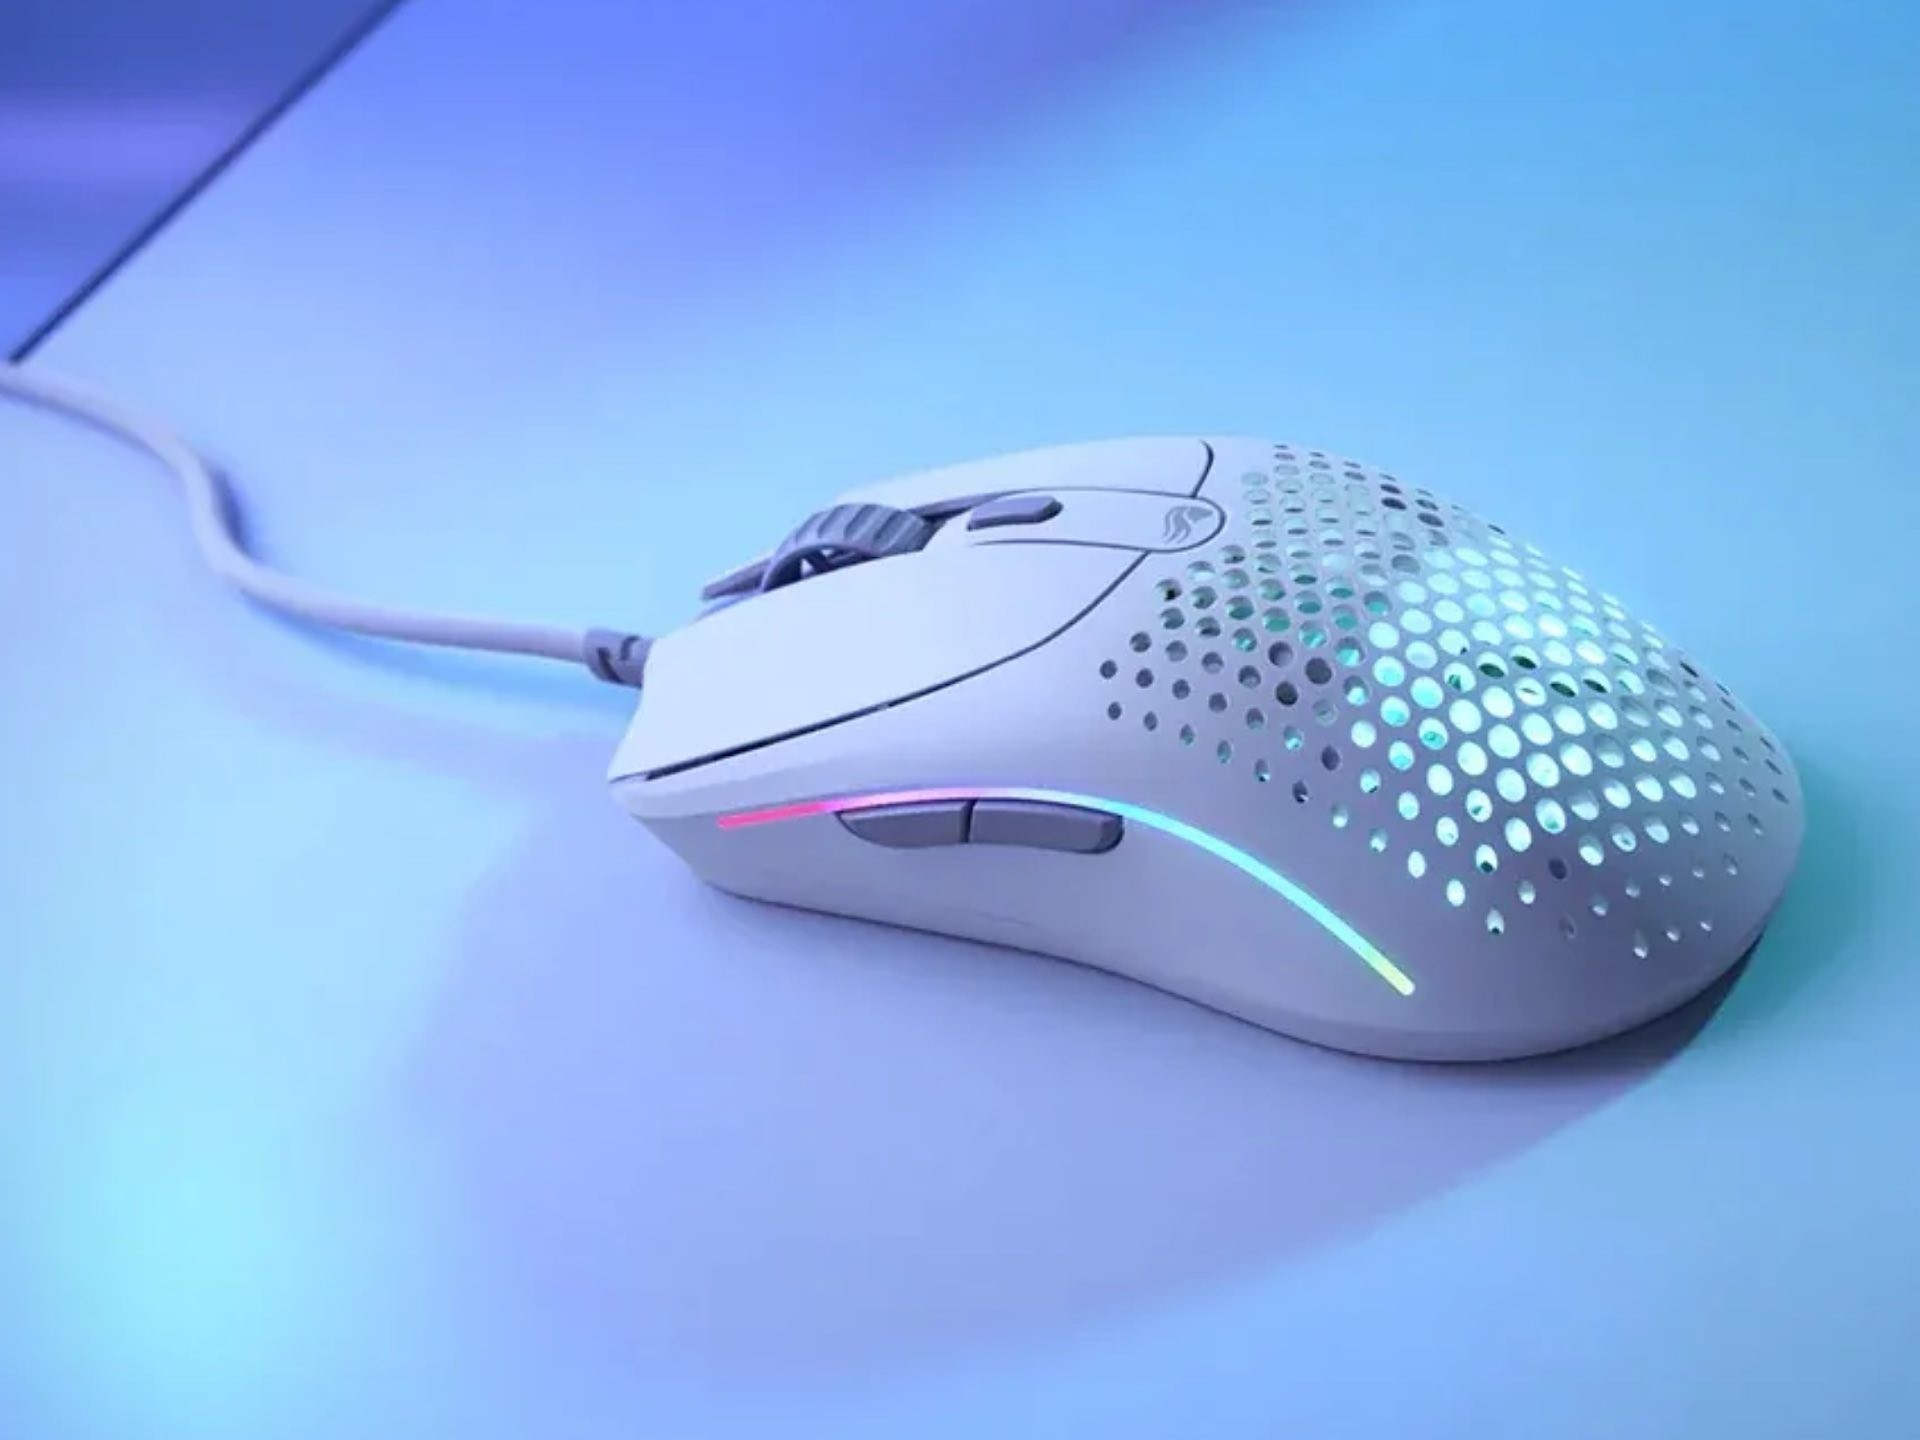 glorious-gamings-model-o-2-ultralight-gaming-mice-wired-white